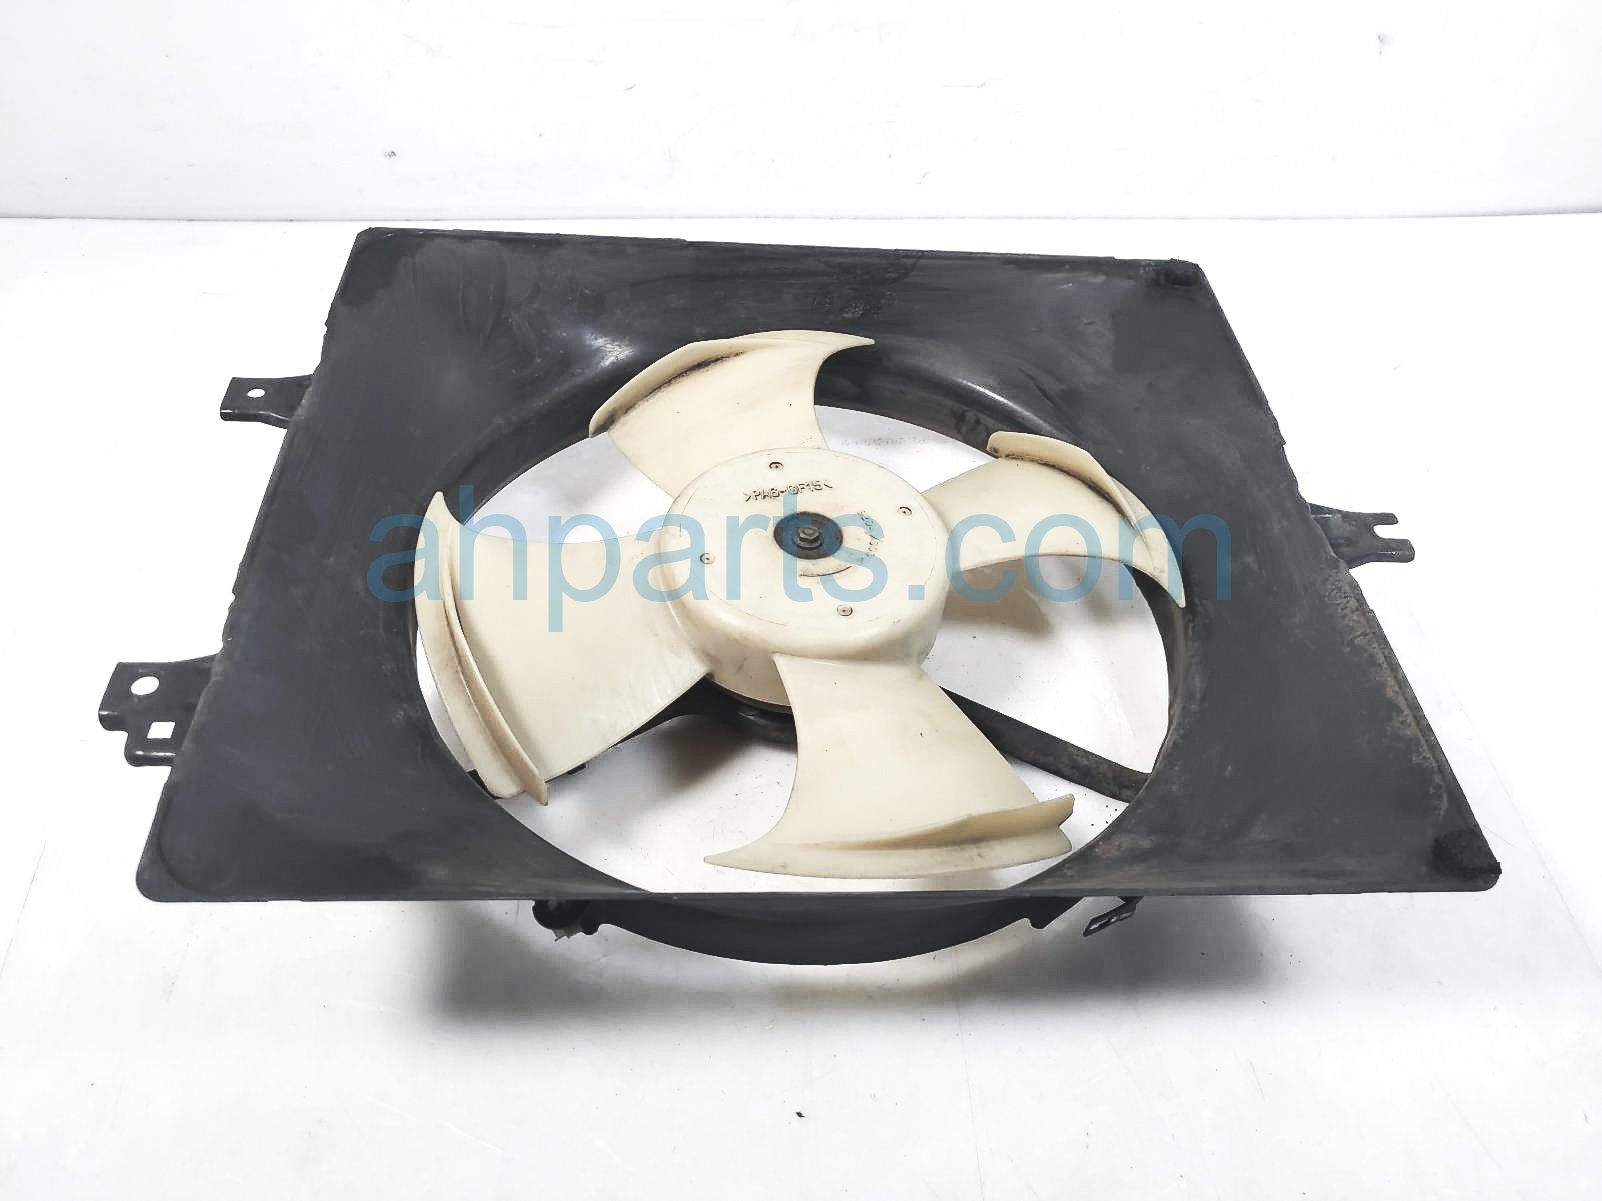 $45 Acura AC CONDENSER FAN ASSEMBLY